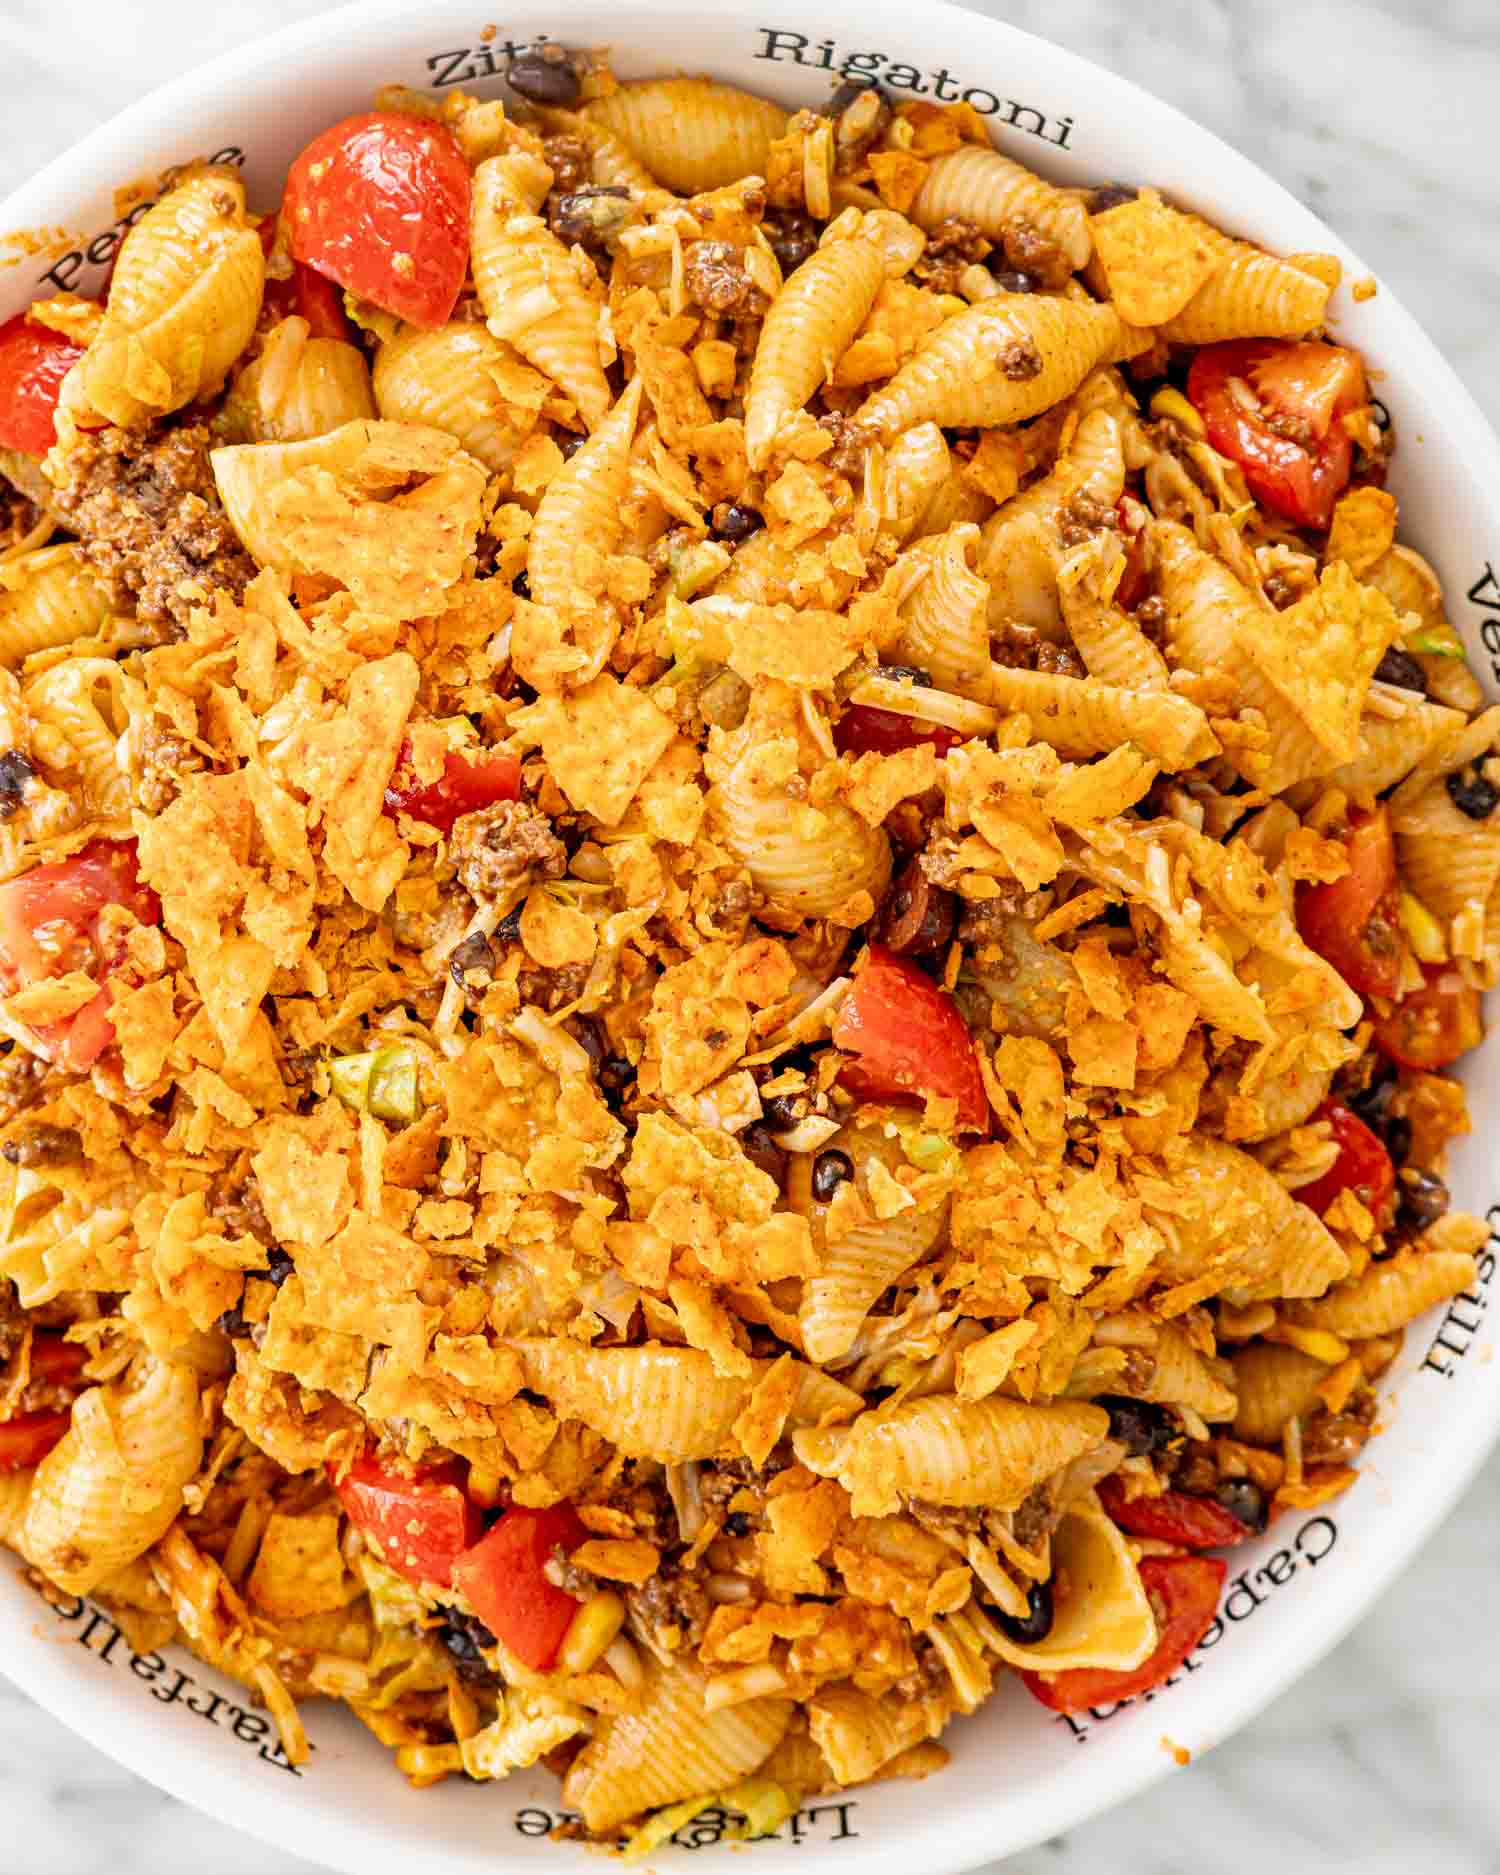 freshly made taco pasta salad in a large bowl.